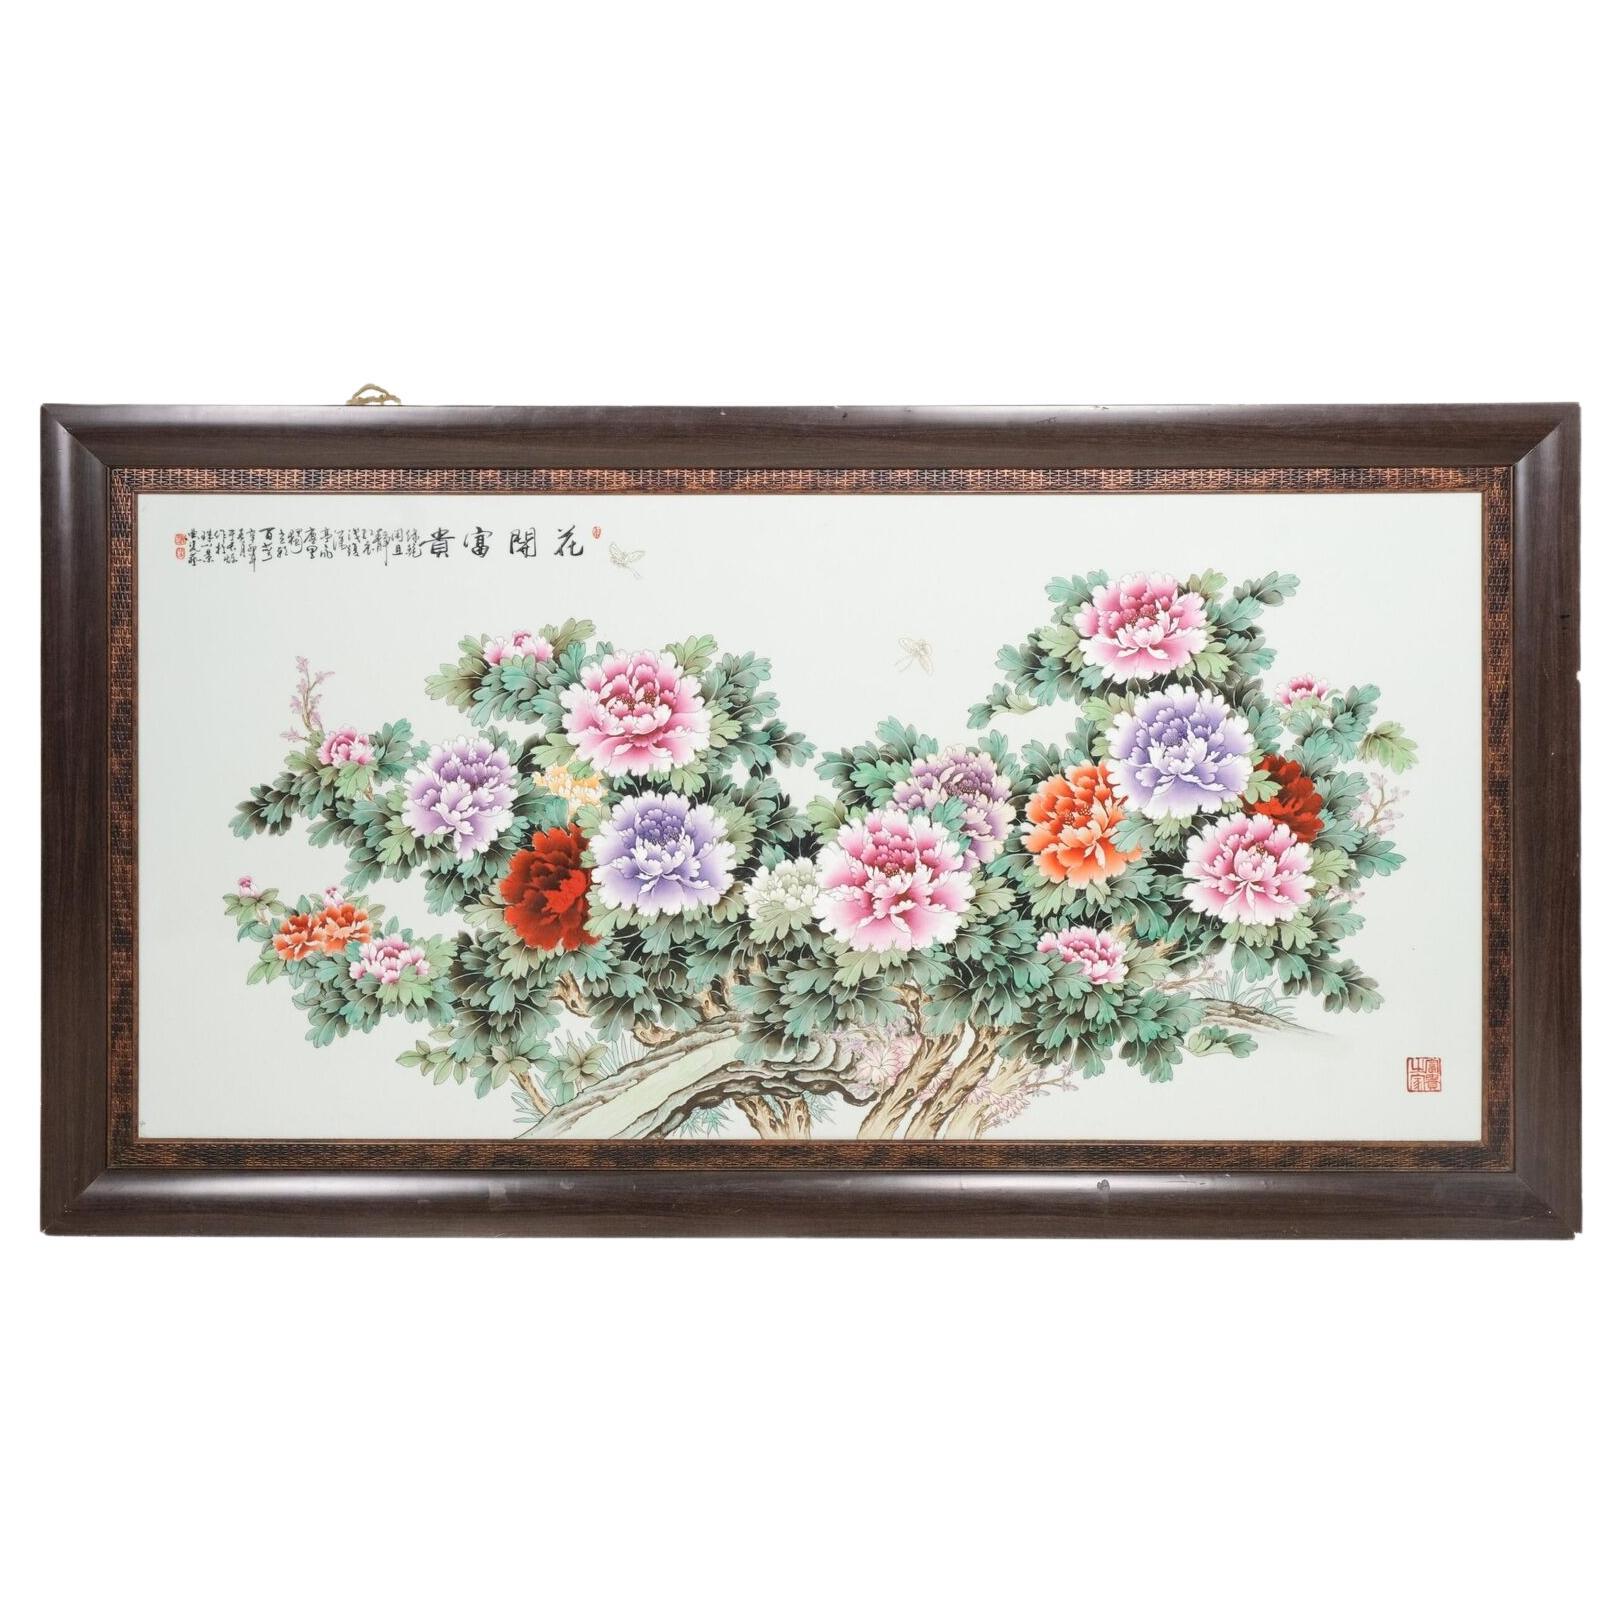 Huge 2 meter Large Chinese Porcelain Plaque Painting Flowers Ca 1960 - 1980 Fenc For Sale